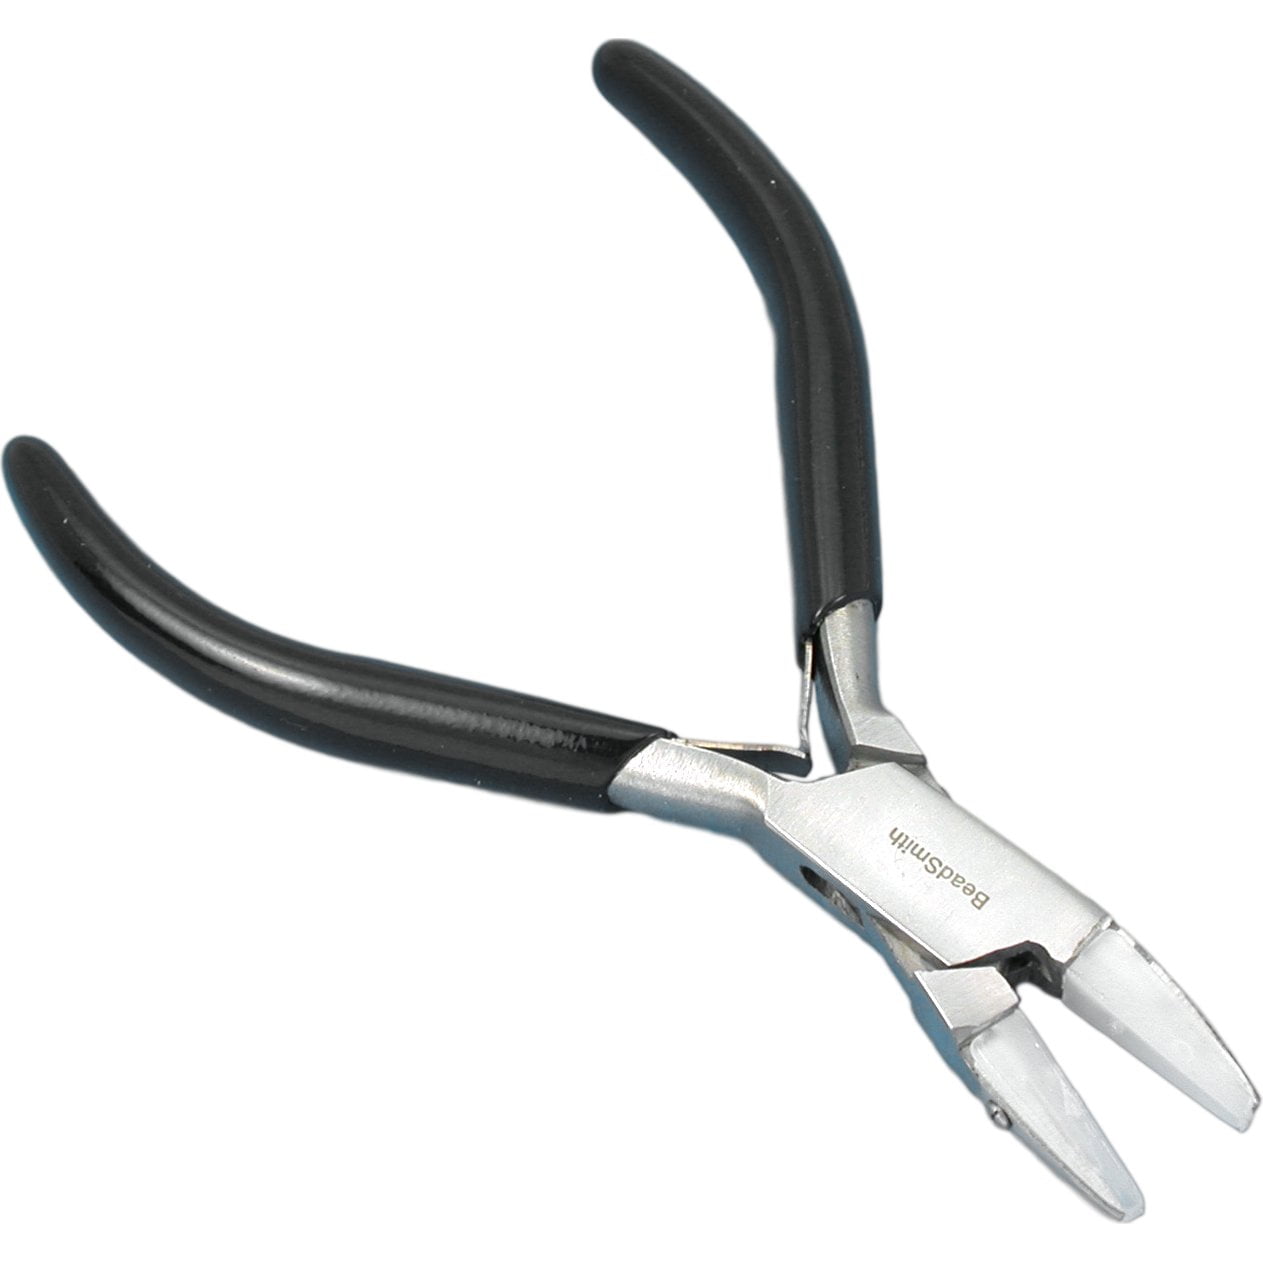  Nylon Flat Nose Pliers, Pliers Head Stepped Round Mouth Design  Bail Making Pliers 3 Types Flat Nose Nylon Pliers for Making Coils with  Various Wires : Arts, Crafts & Sewing